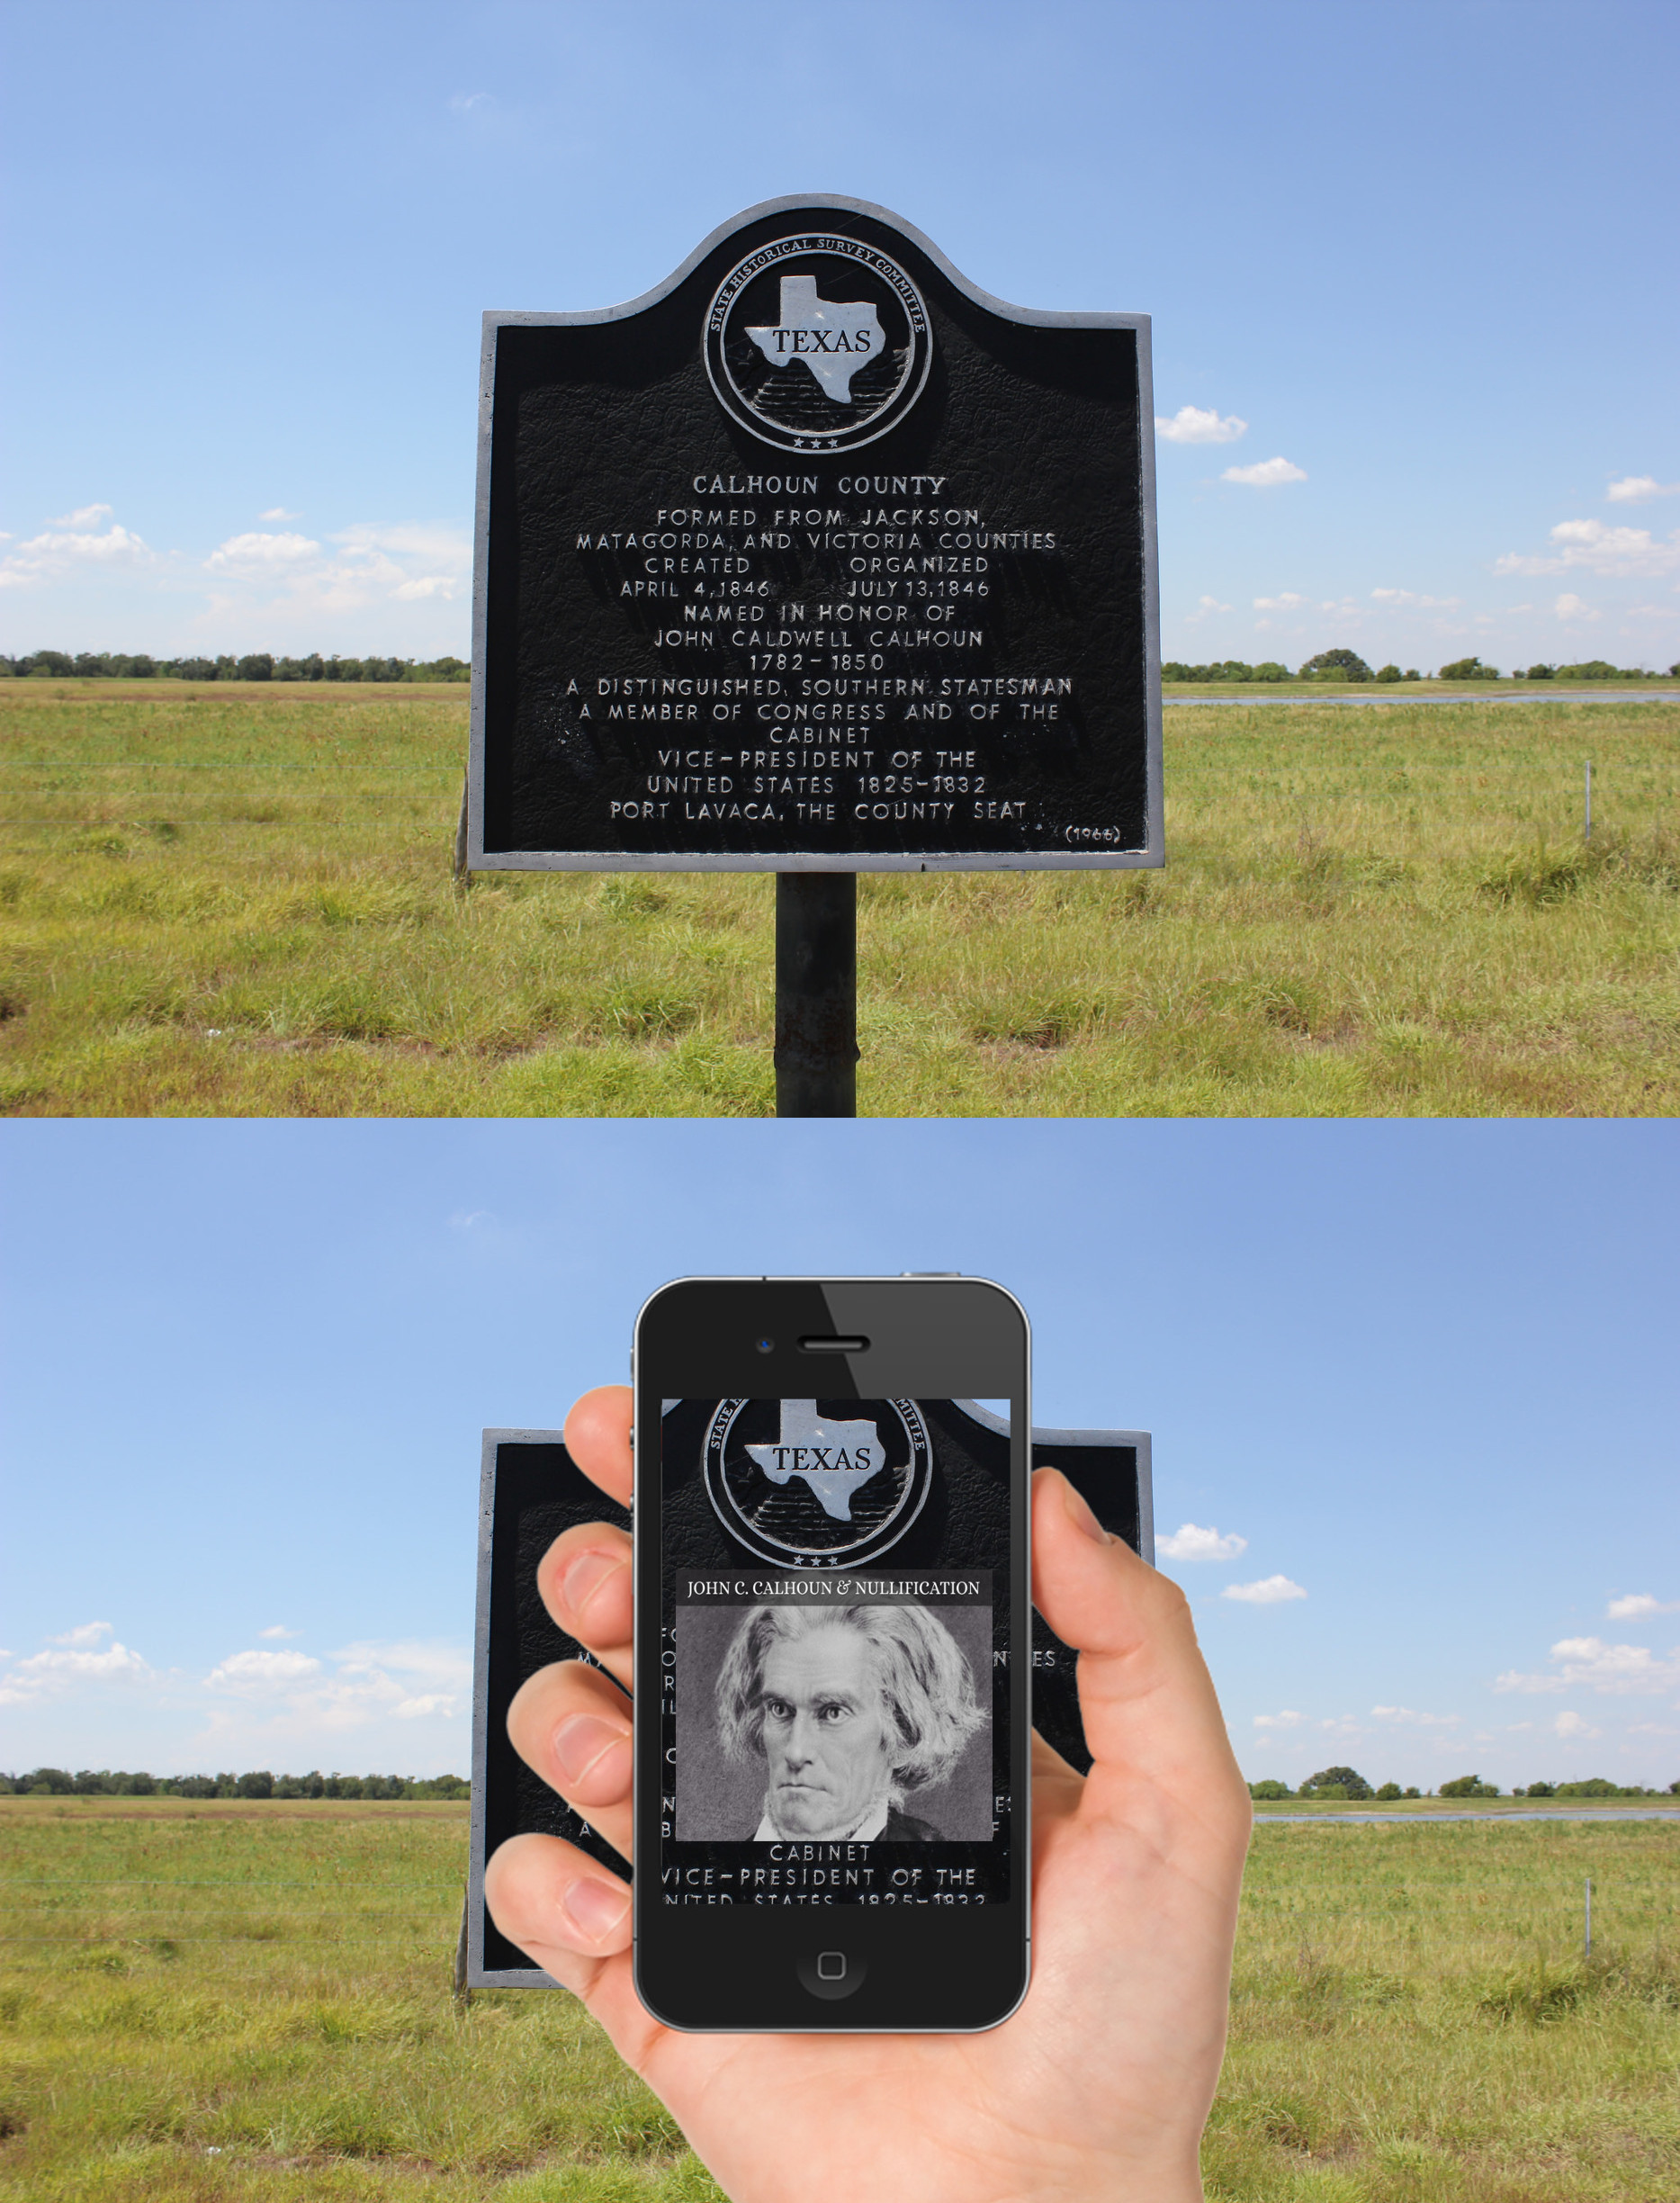 Augmented reality can be used to overlay digital information onto existing texts such as historical markers. This modified image is based on a photograph by Nicholas Henderson. 2015.